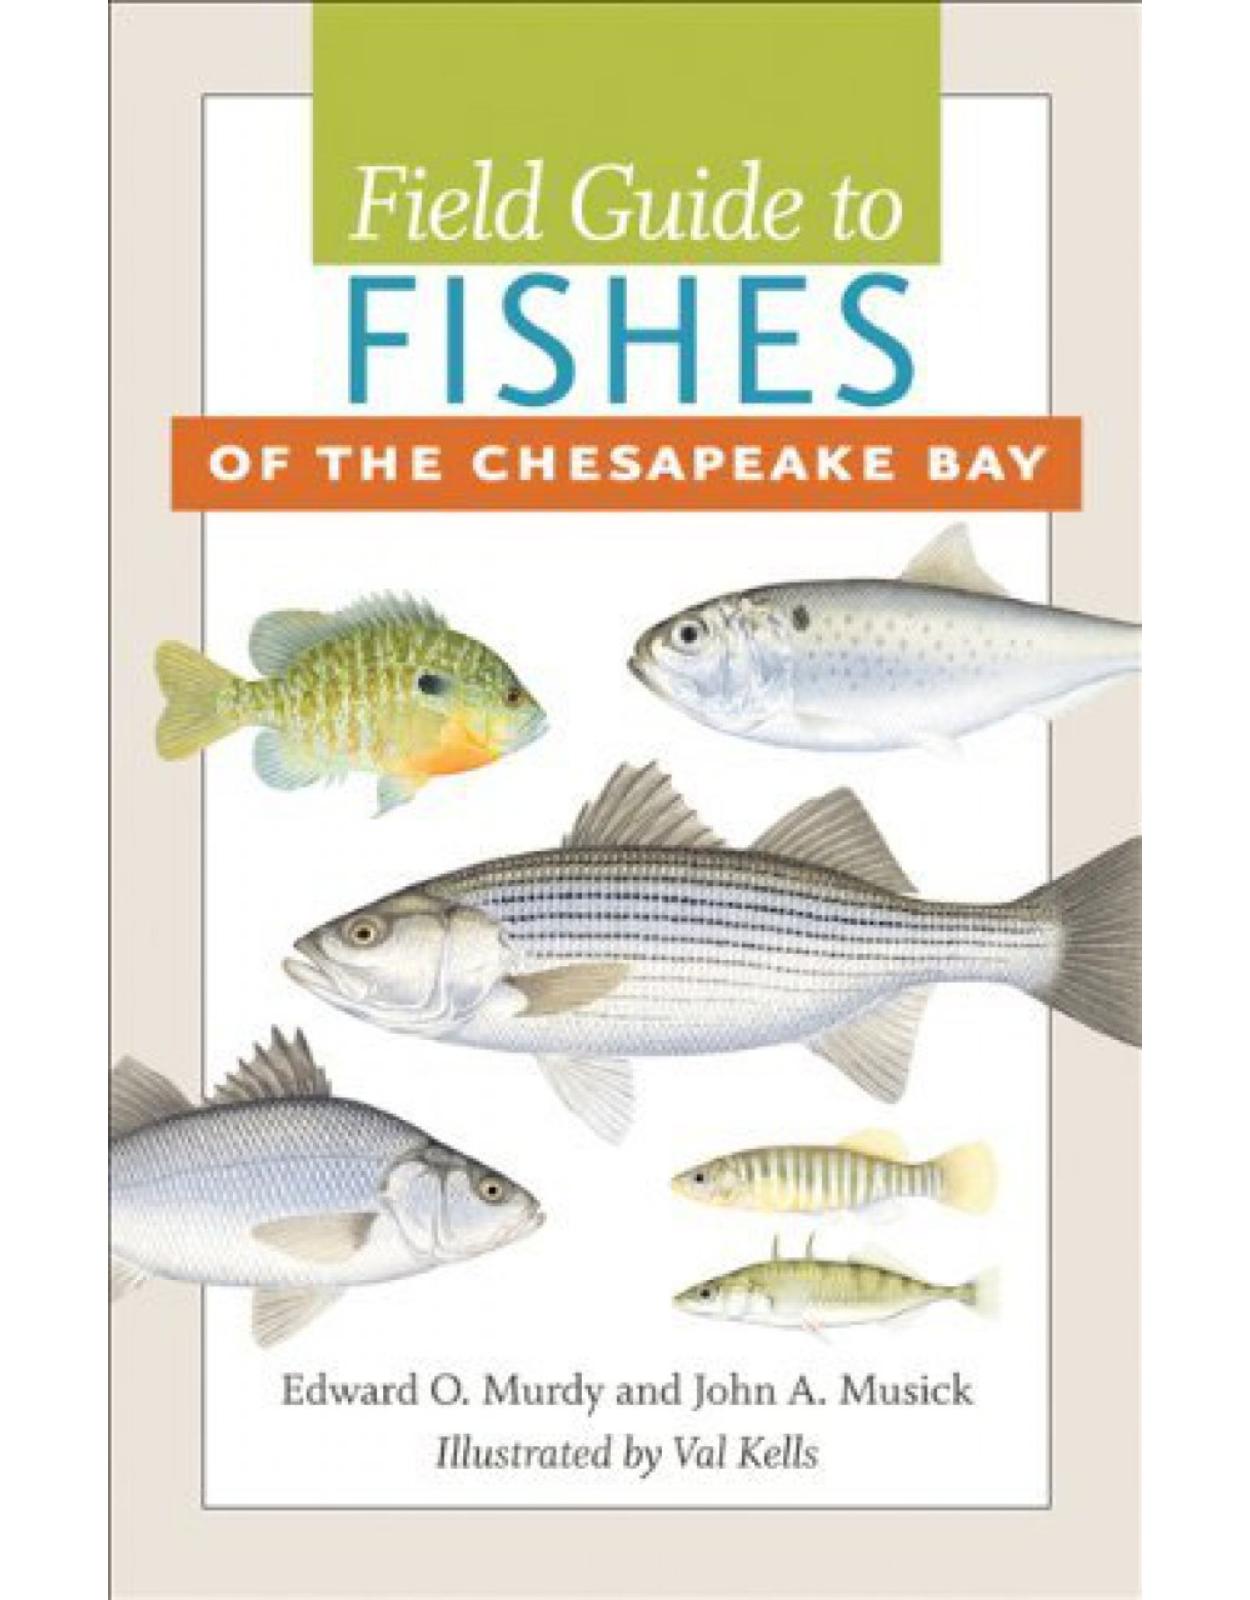 Field Guide to Fishes of the Chesapeake Bay.